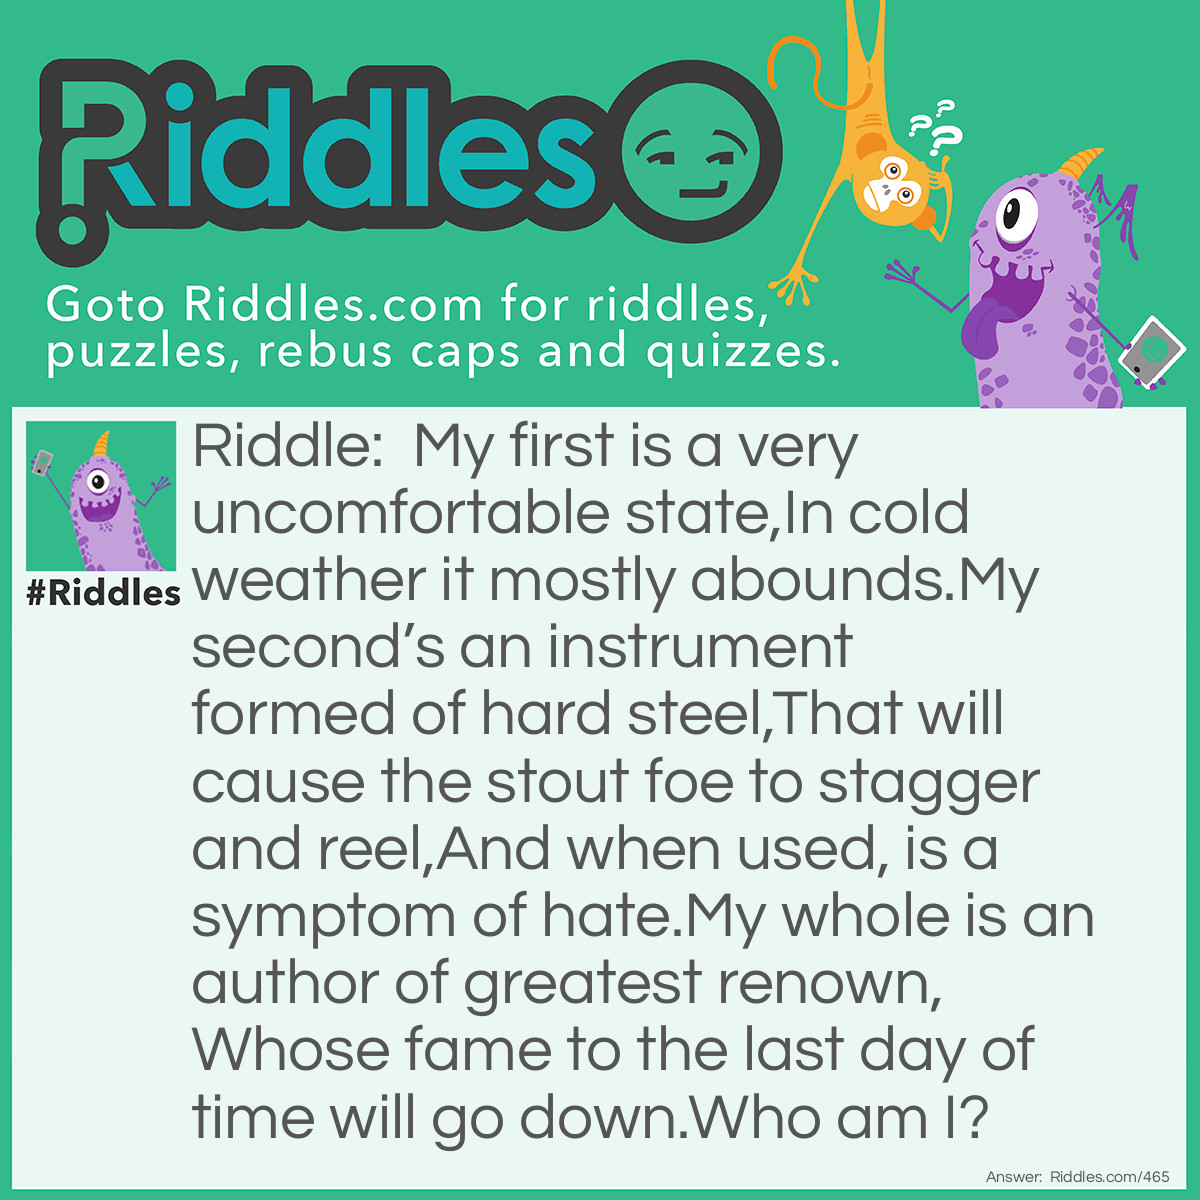 Riddle: My first is a very uncomfortable state,
In cold weather it mostly abounds.
My second's an instrument formed of hard steel,
That will cause the stout foe to stagger and reel,
And when used, is a symptom of hate.
My whole is an author of <a href="https://www.riddles.com/best-riddles">greatest</a> renown,
Whose fame to the last day of time will go down.
Who am I? Answer: Shakespeare.